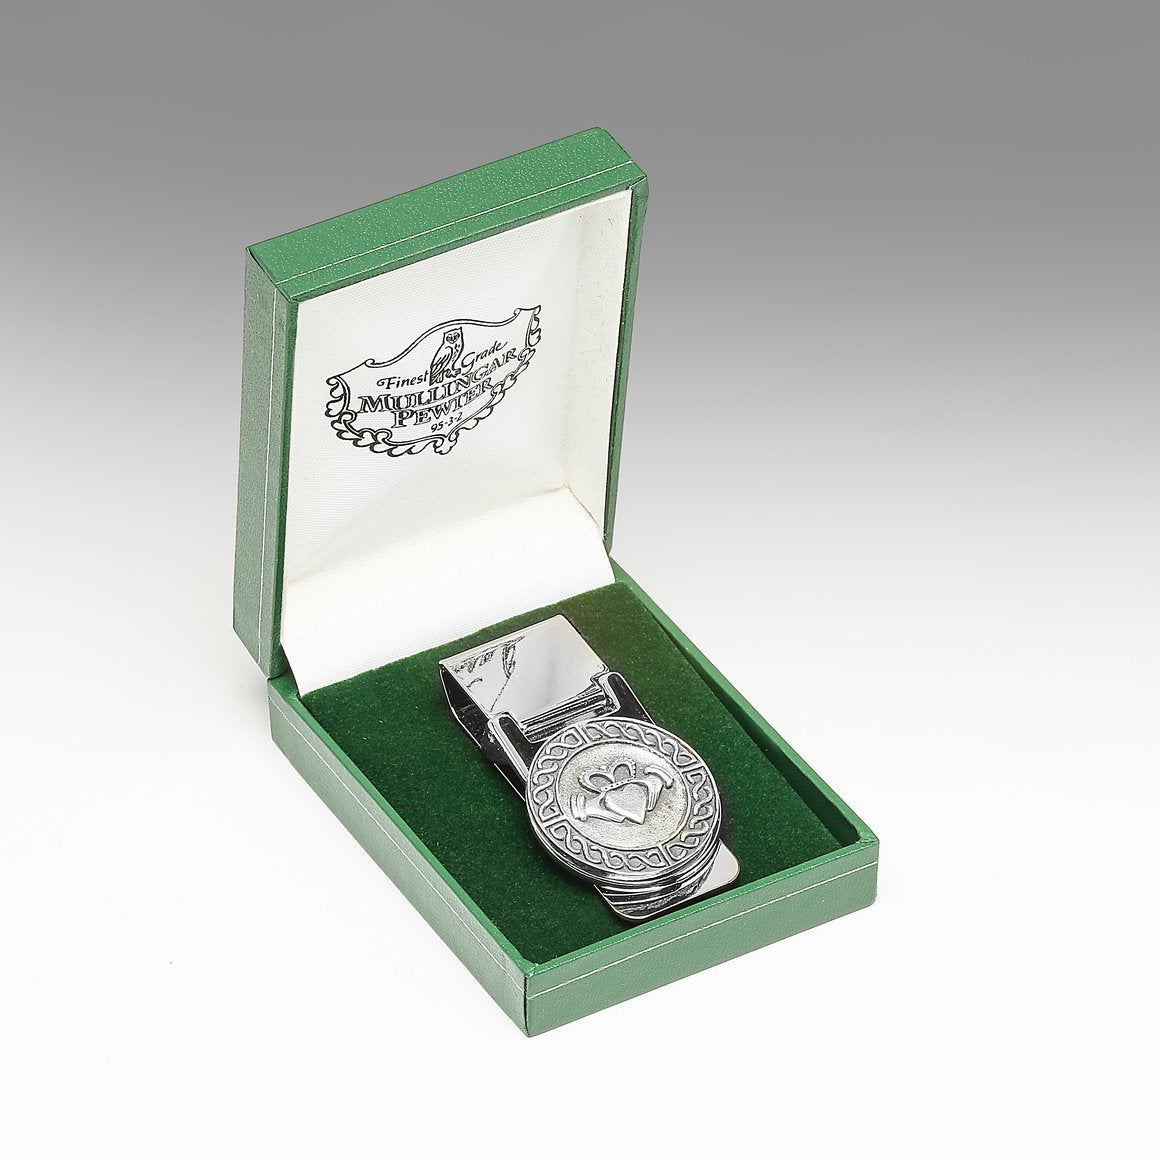 Claddagh Design on Pewter Money Clip in Green Gift Box by  Mullingar Pewter